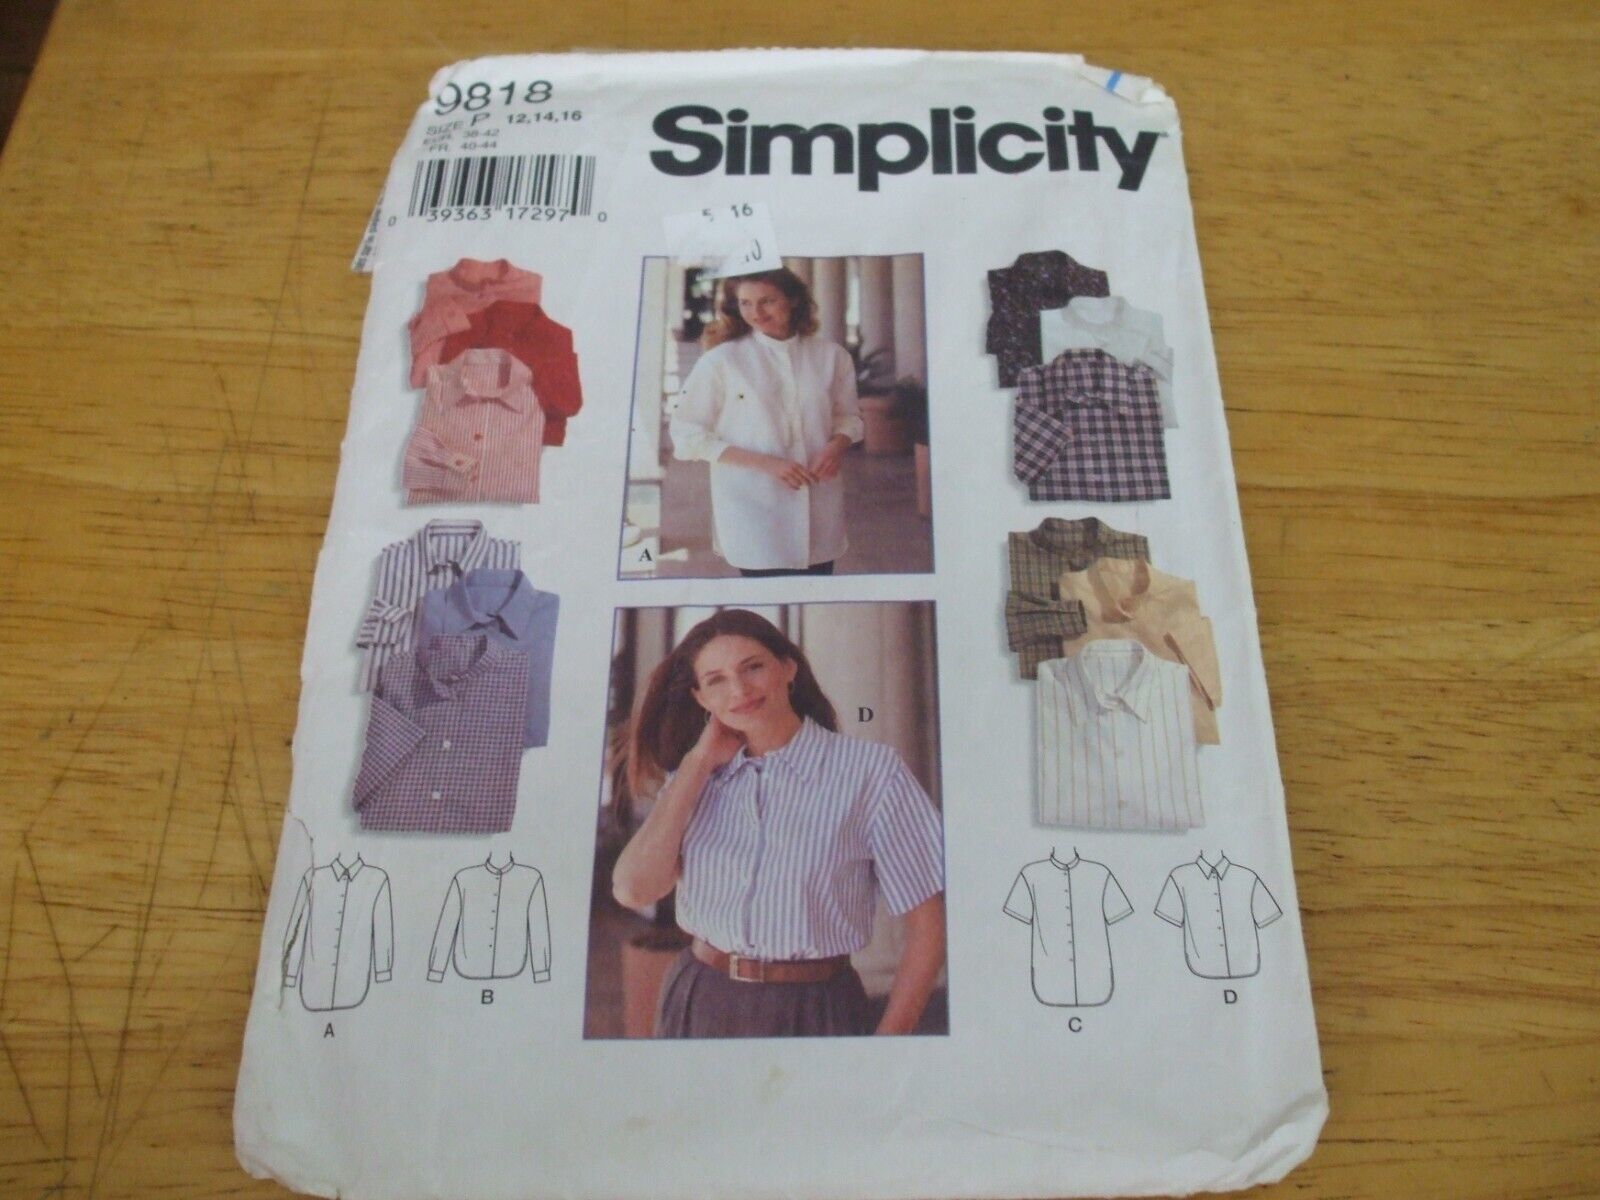 Primary image for Simplicity 9818 Misses Shirt Pattern - Size 12/14/16 Bust 34 to 38